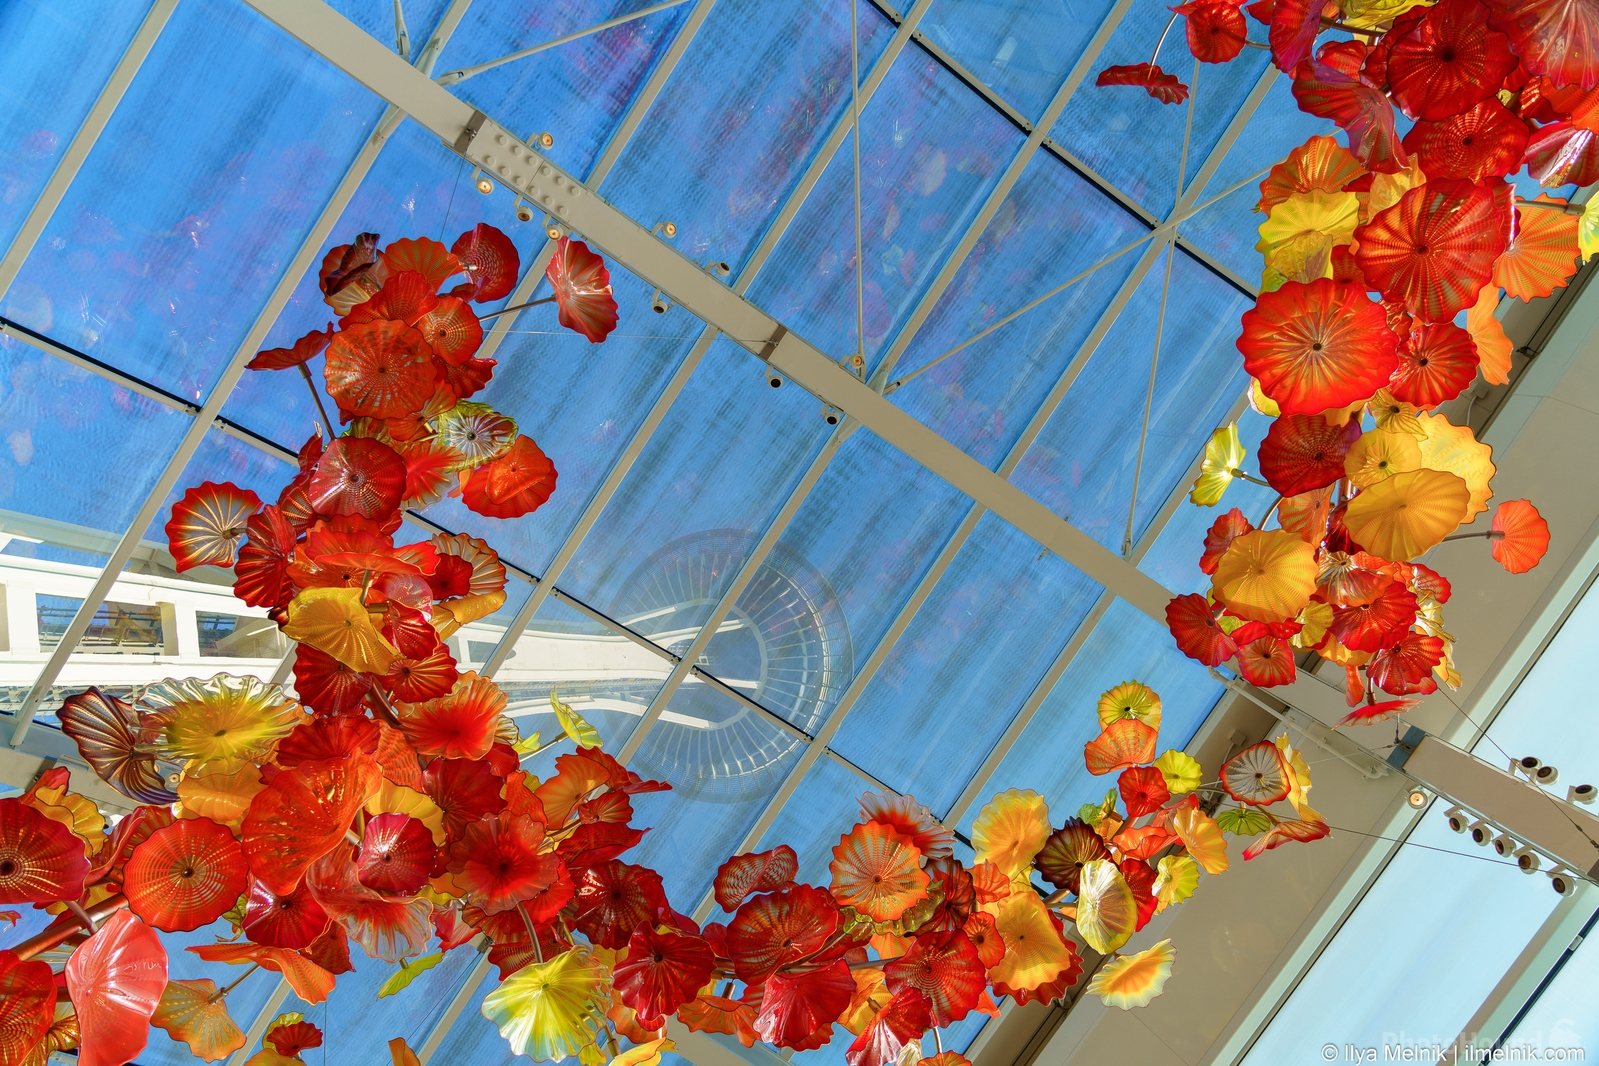 Image of The Chihuly Garden and Glass – Seattle Center by Ilya Melnik